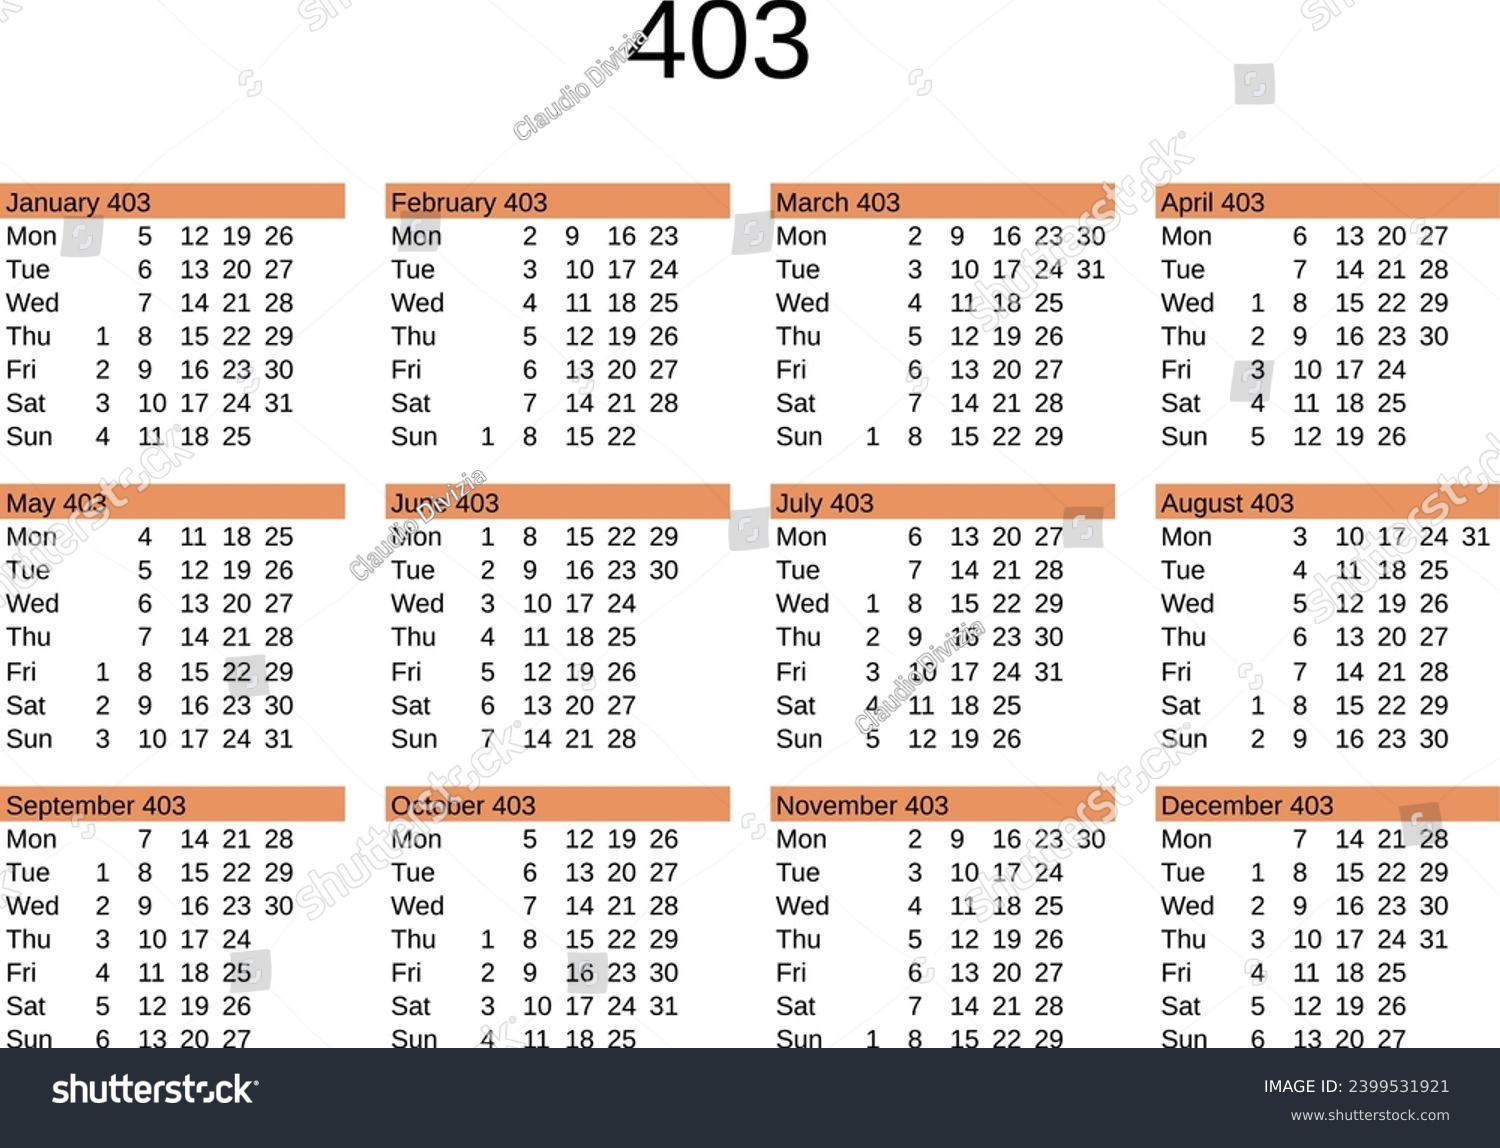 SVG of calendar of year 403 in English language svg